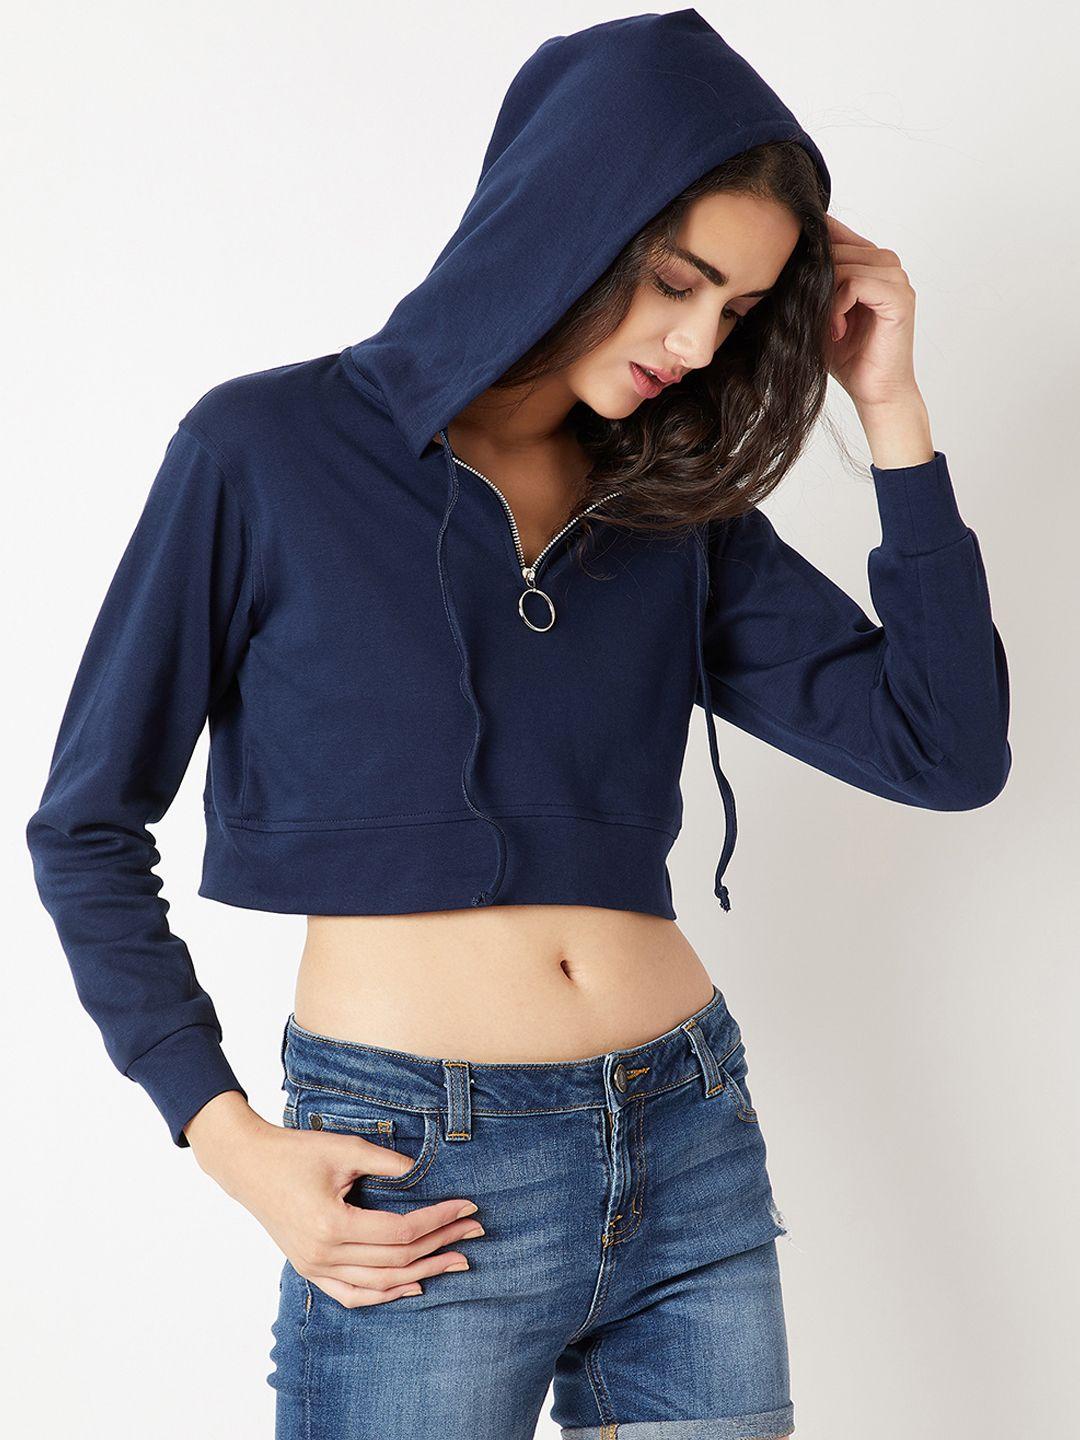 miss-chase-women-navy-blue-solid-hooded-sweatshirt